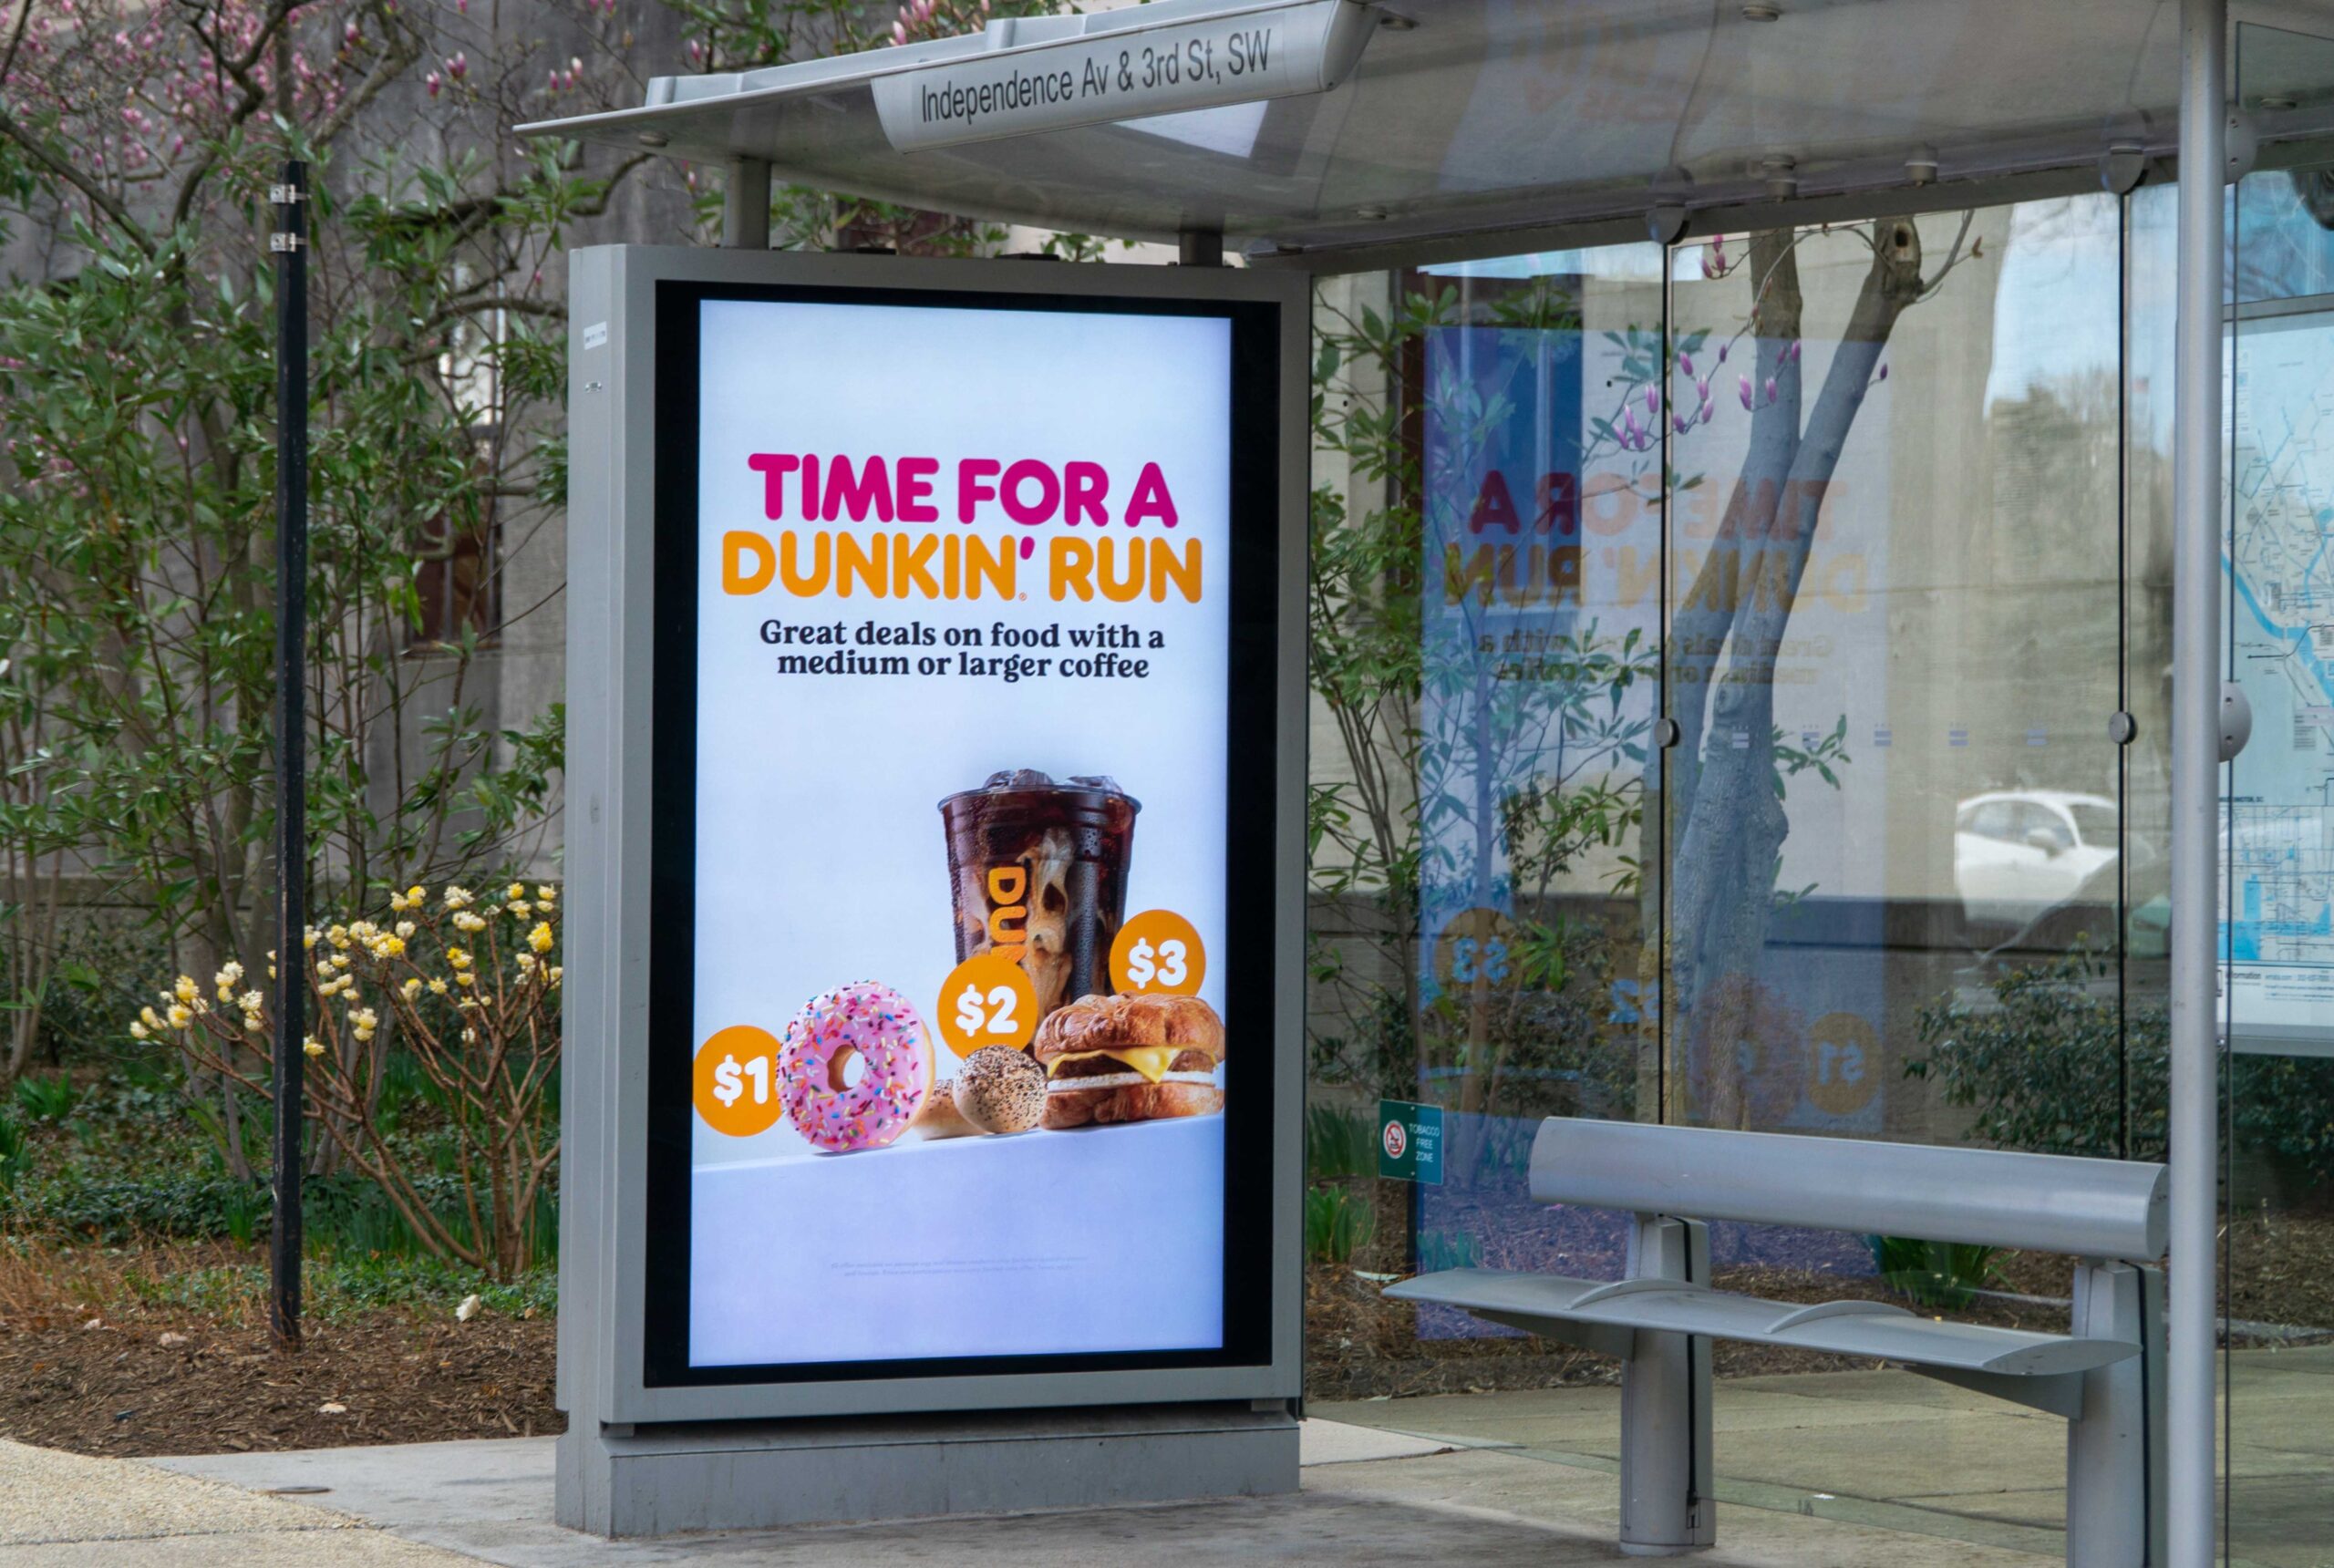 DOOH Ads Outperform Competitive Media in Driving Consumer Favorability and Action